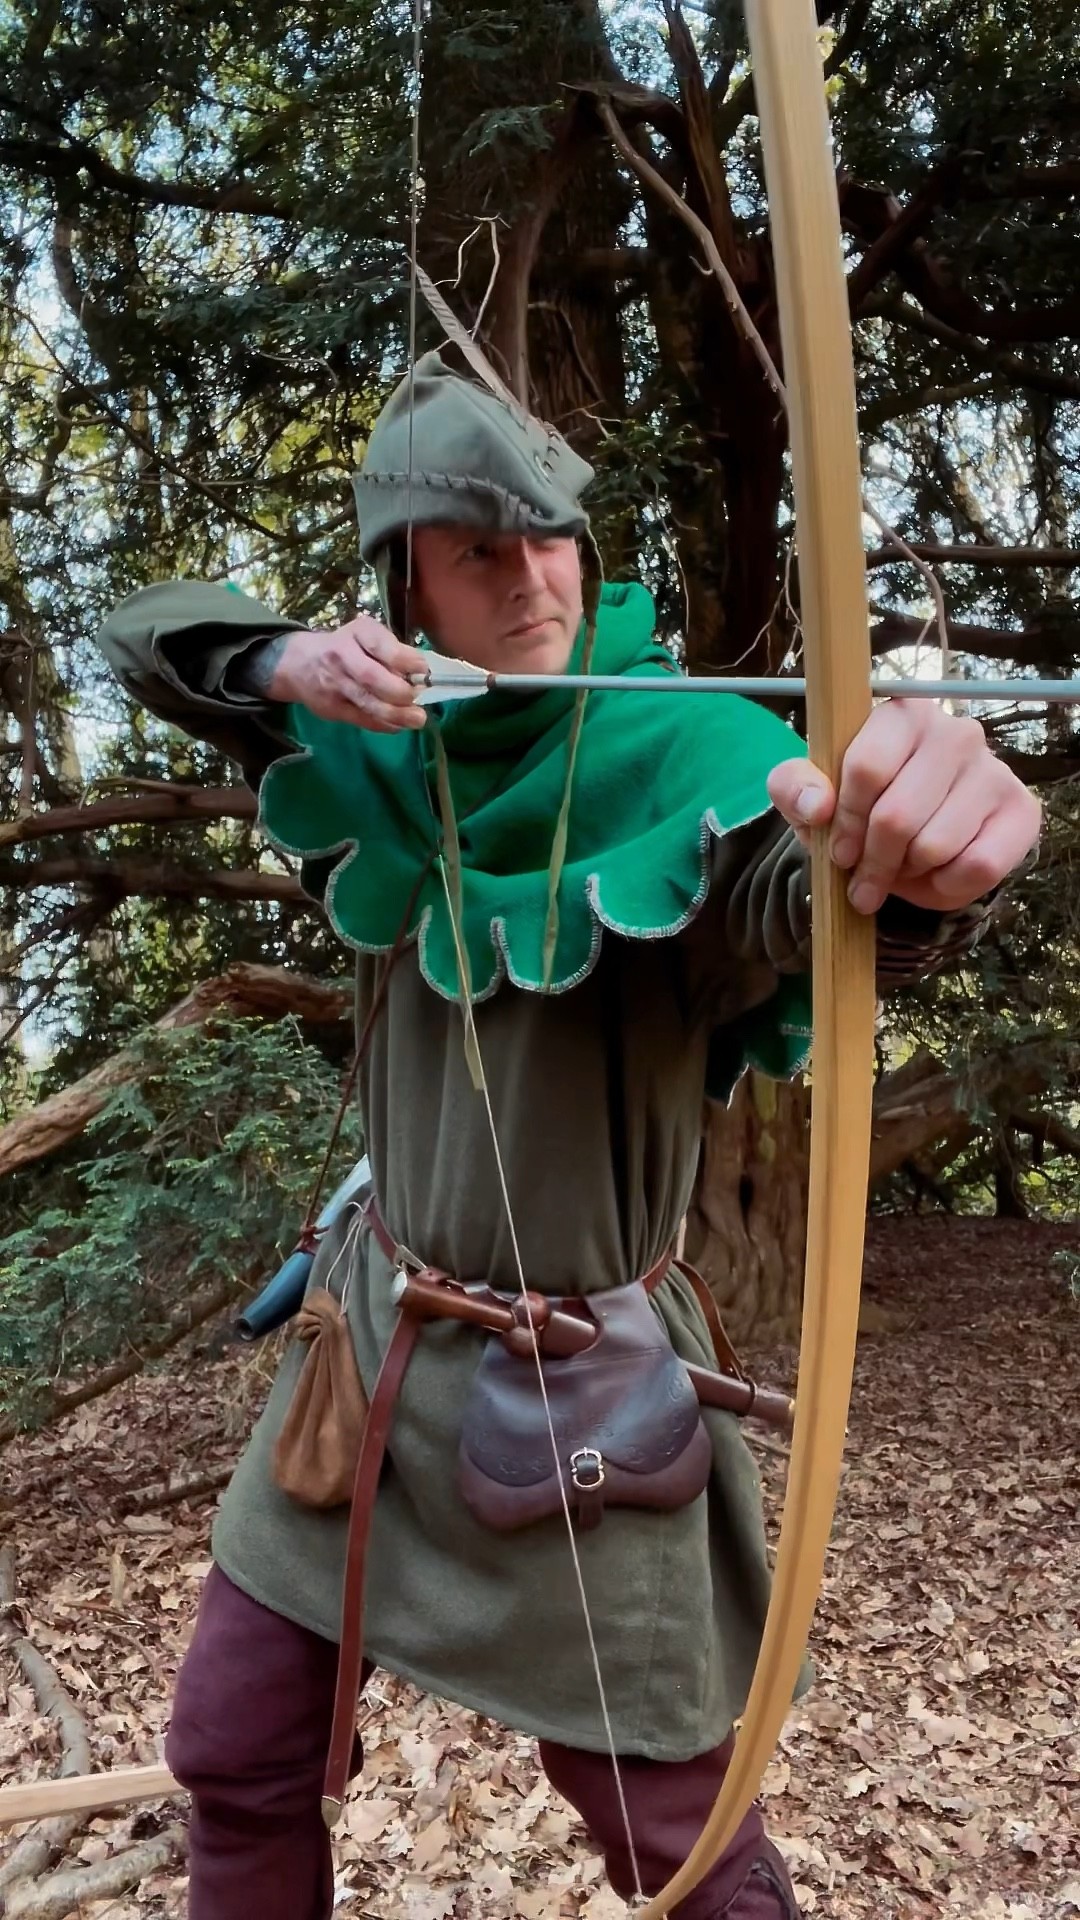 3 Facts about Robin Hood #robinhood #medieval #medievalhistory #history